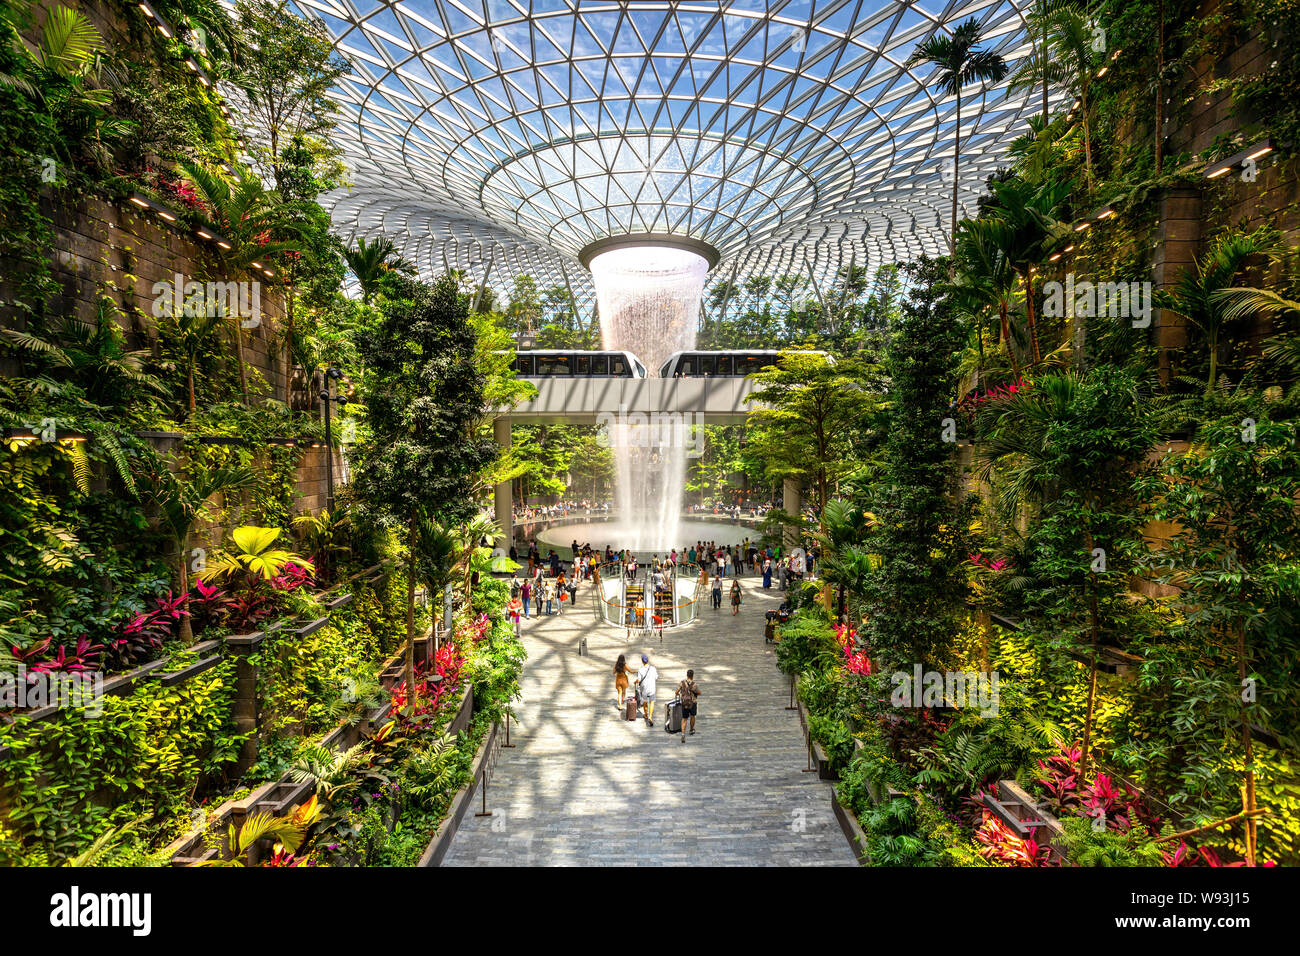 Singapore - June 11, 2019: Jewel Changi Airport is a mixed-use development at Changi Airport in Singapore, opened in April 2019. Stock Photo